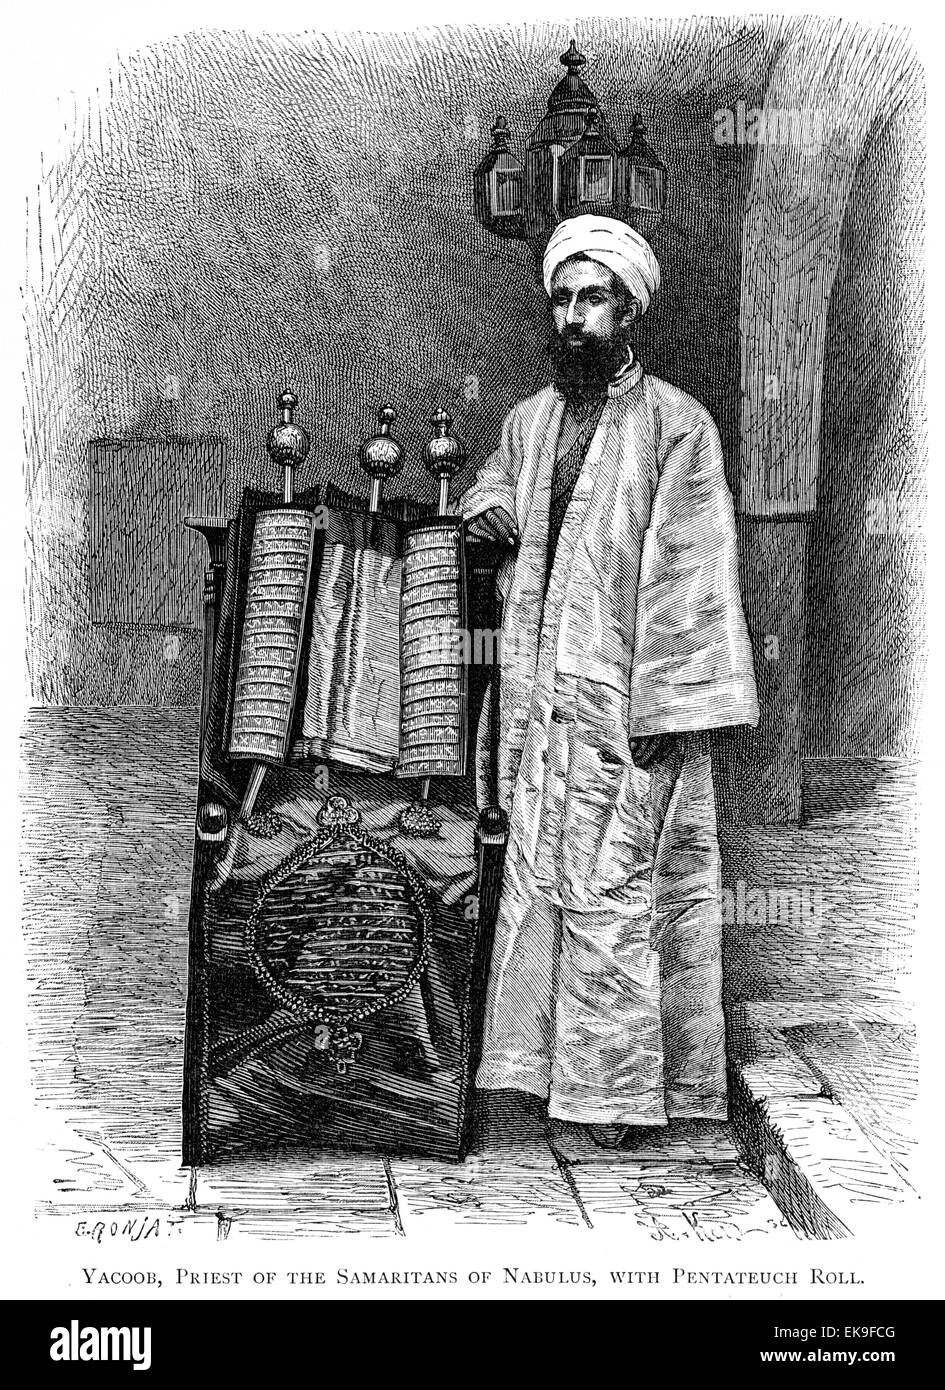 Yacoob, Priest of the Samaritans of Nabulus (Nablus) with Pentateuch Scroll scanned at high res from a book printed in 1889. Stock Photo